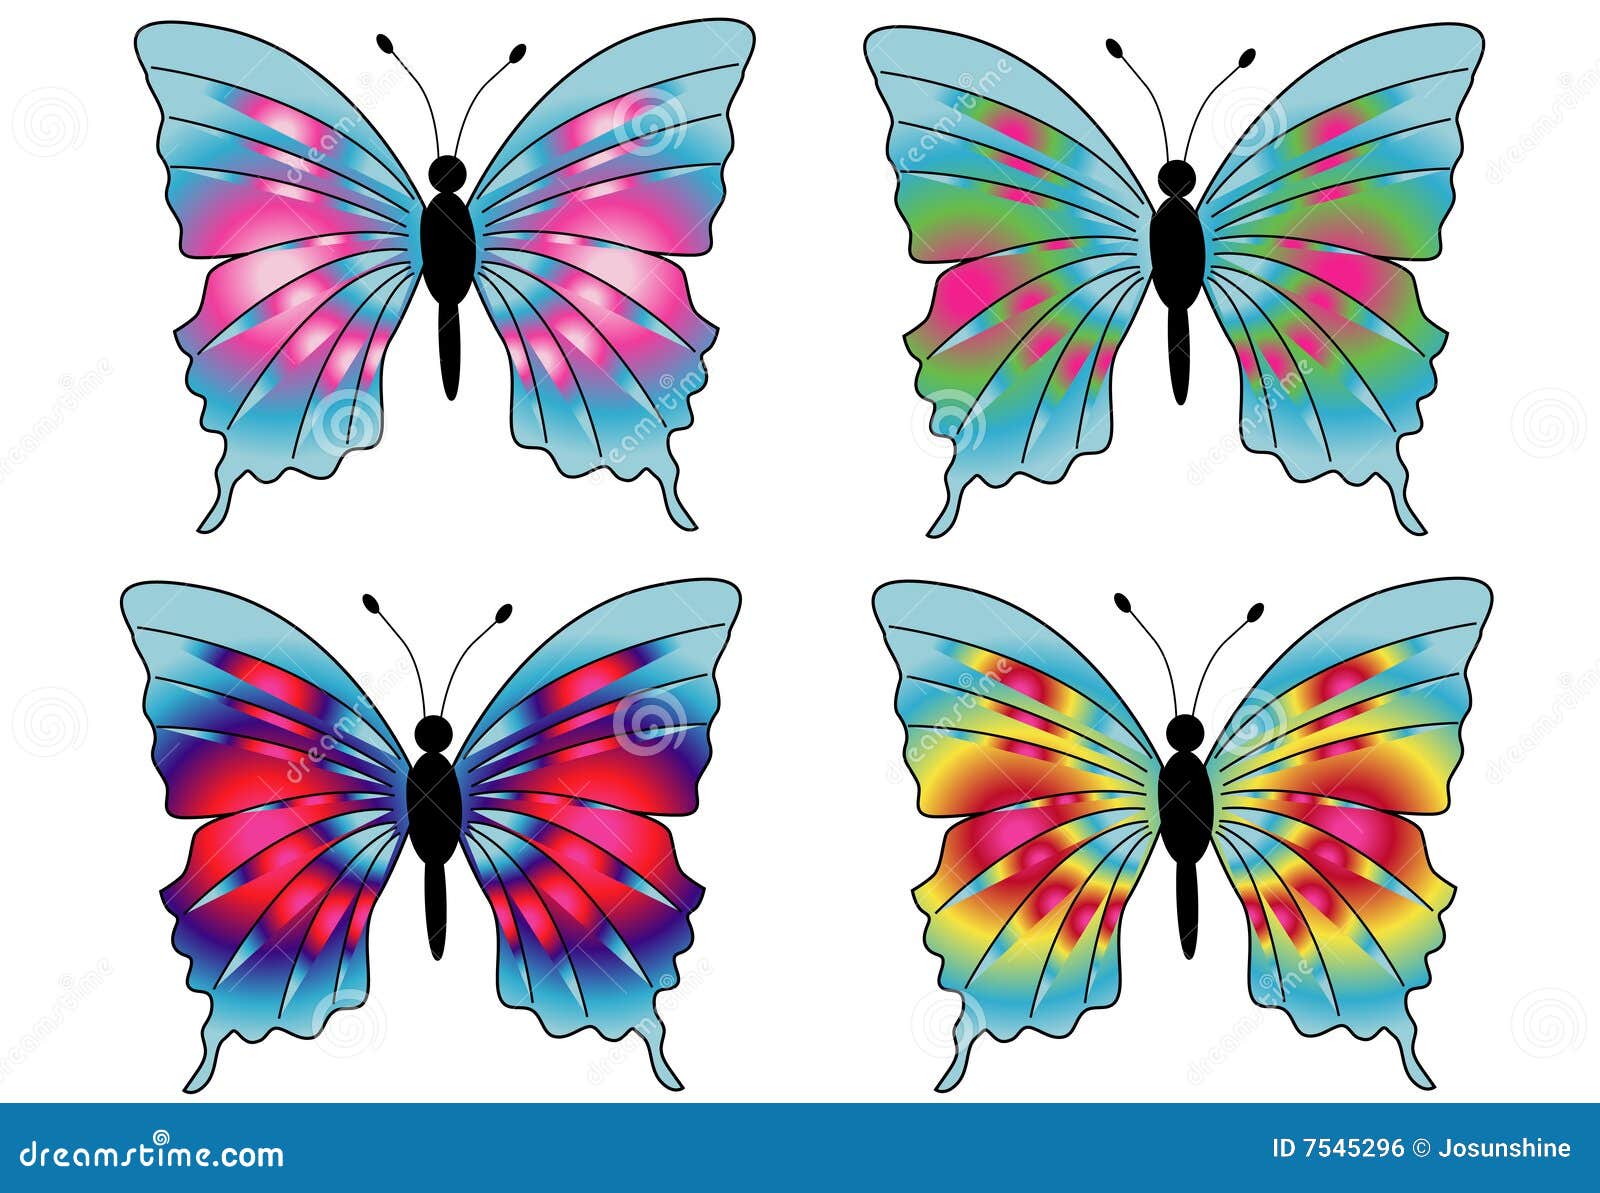 How to Draw Beautiful Butterfly | Step by Step Drawing Tutorial - YouTube